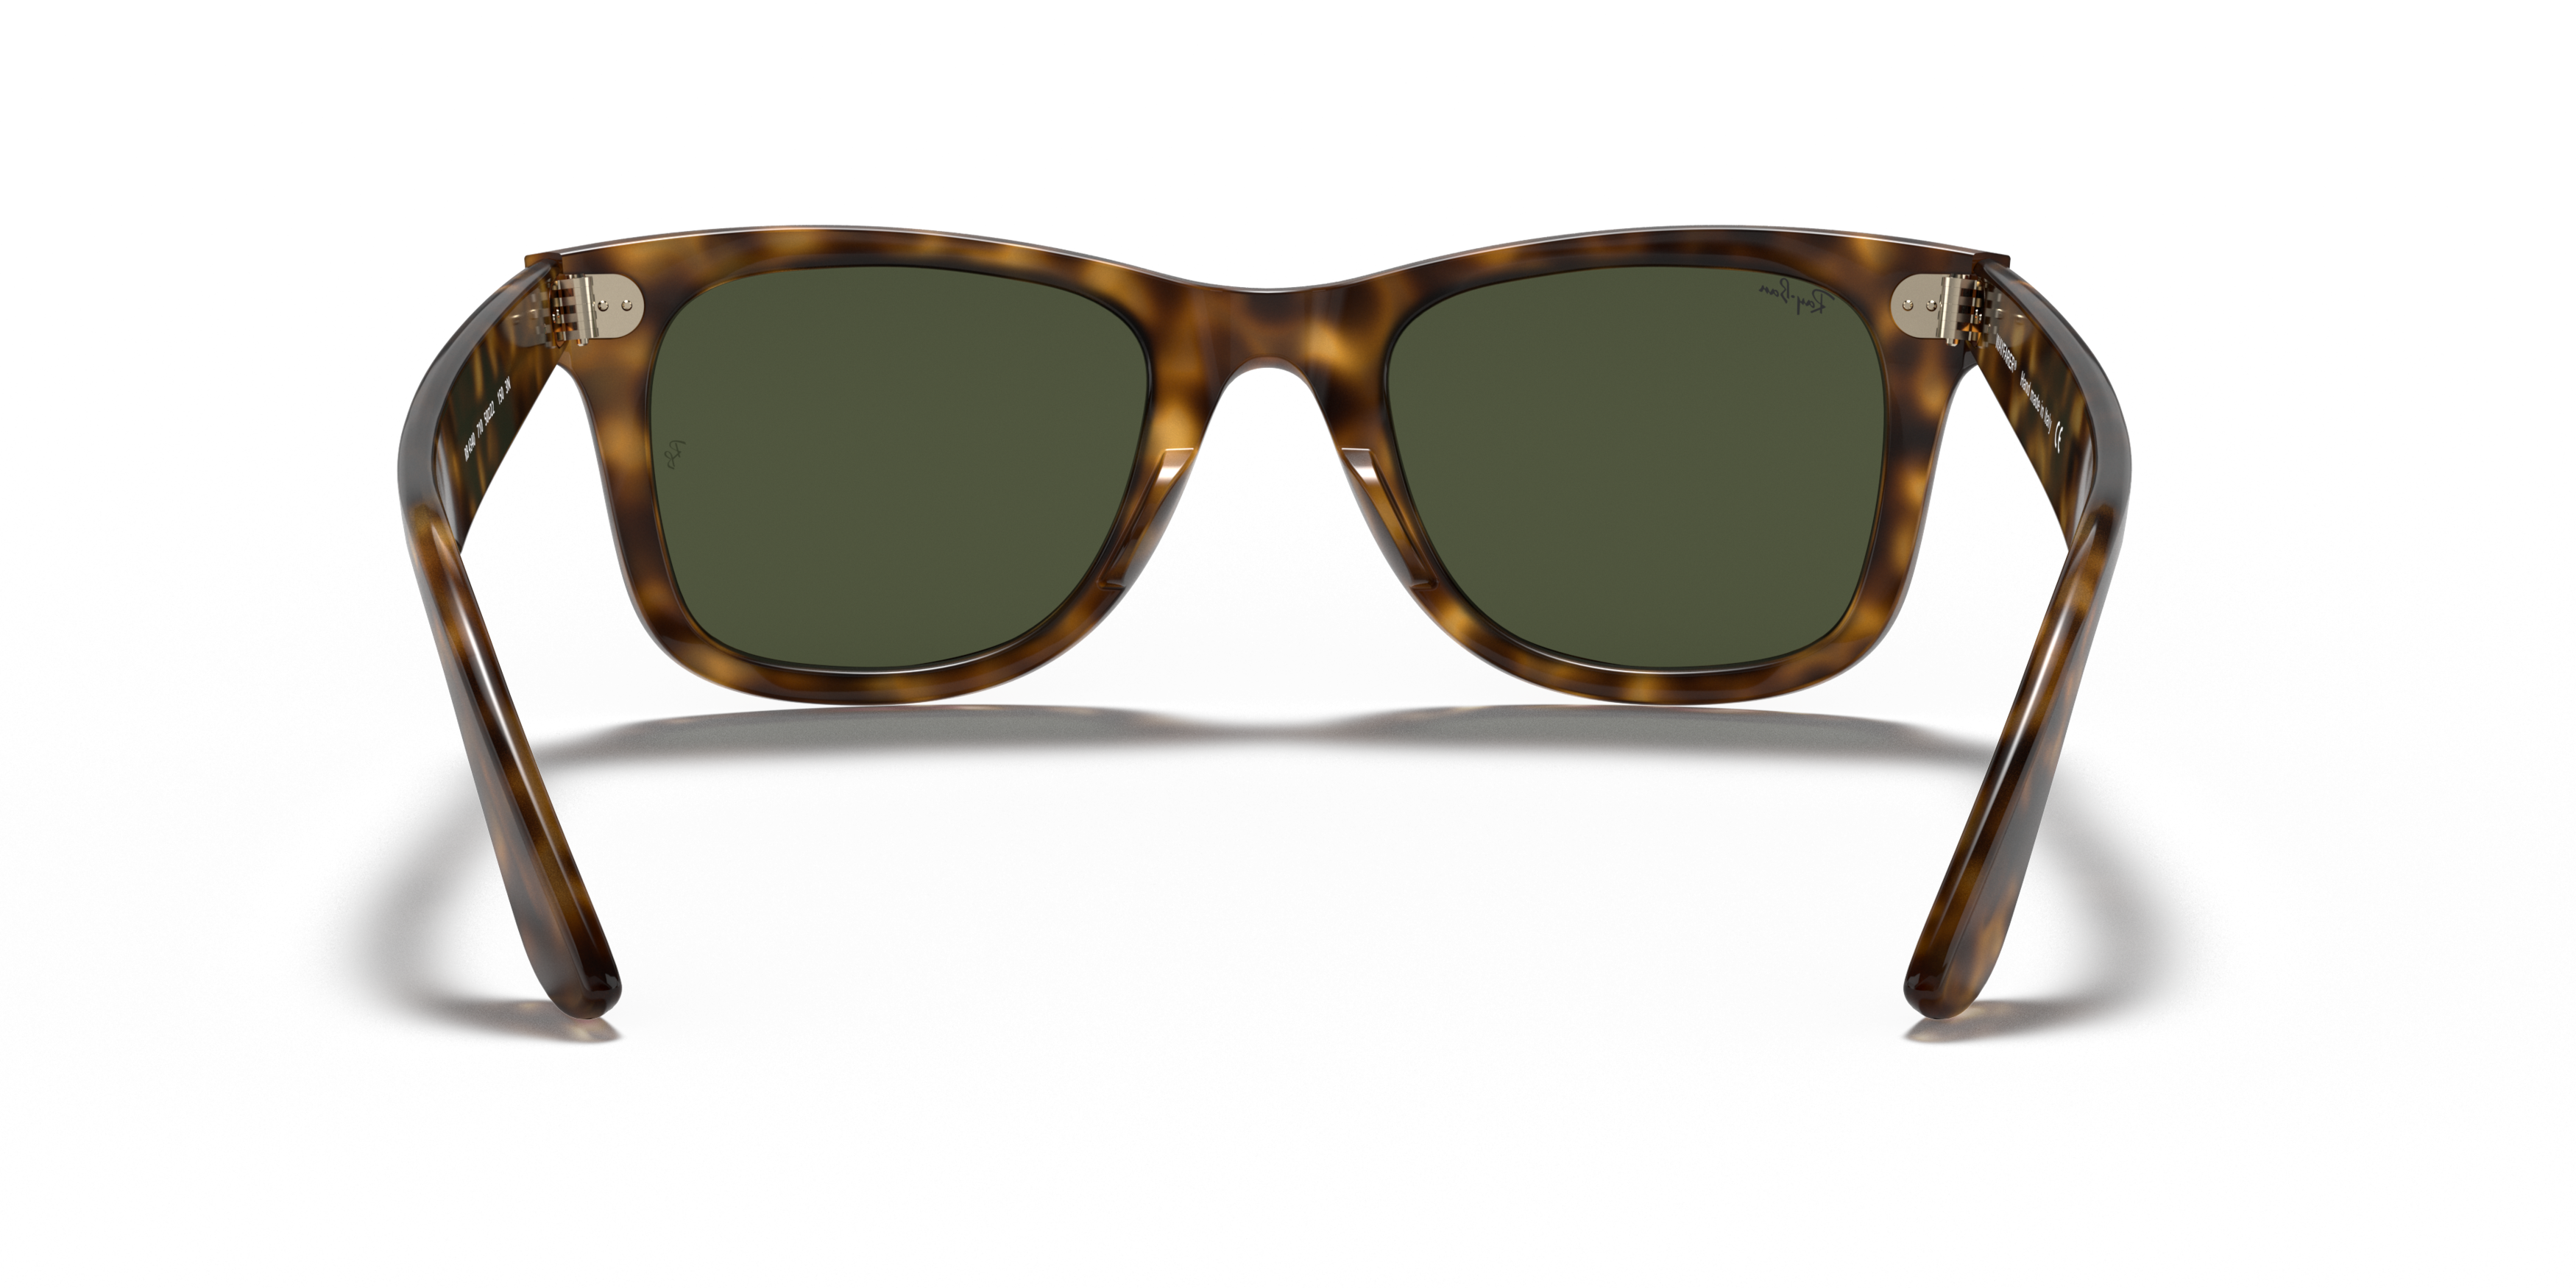 [products.image.detail02] Ray Ban Wayfarer Ease 0RB4340 710